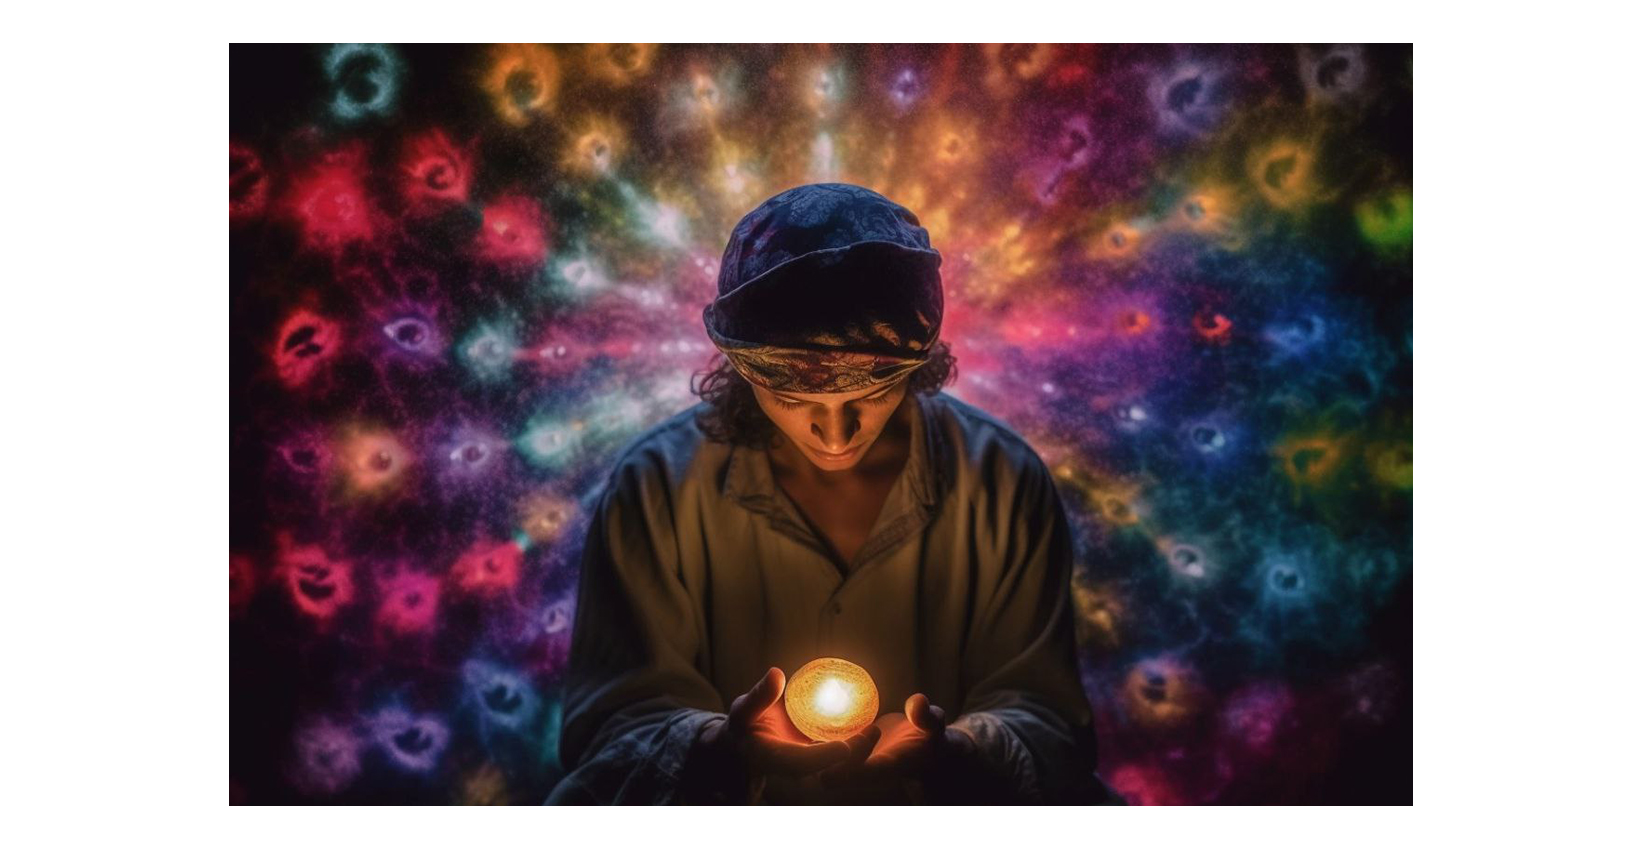 A guy holding an orb of light in his hands